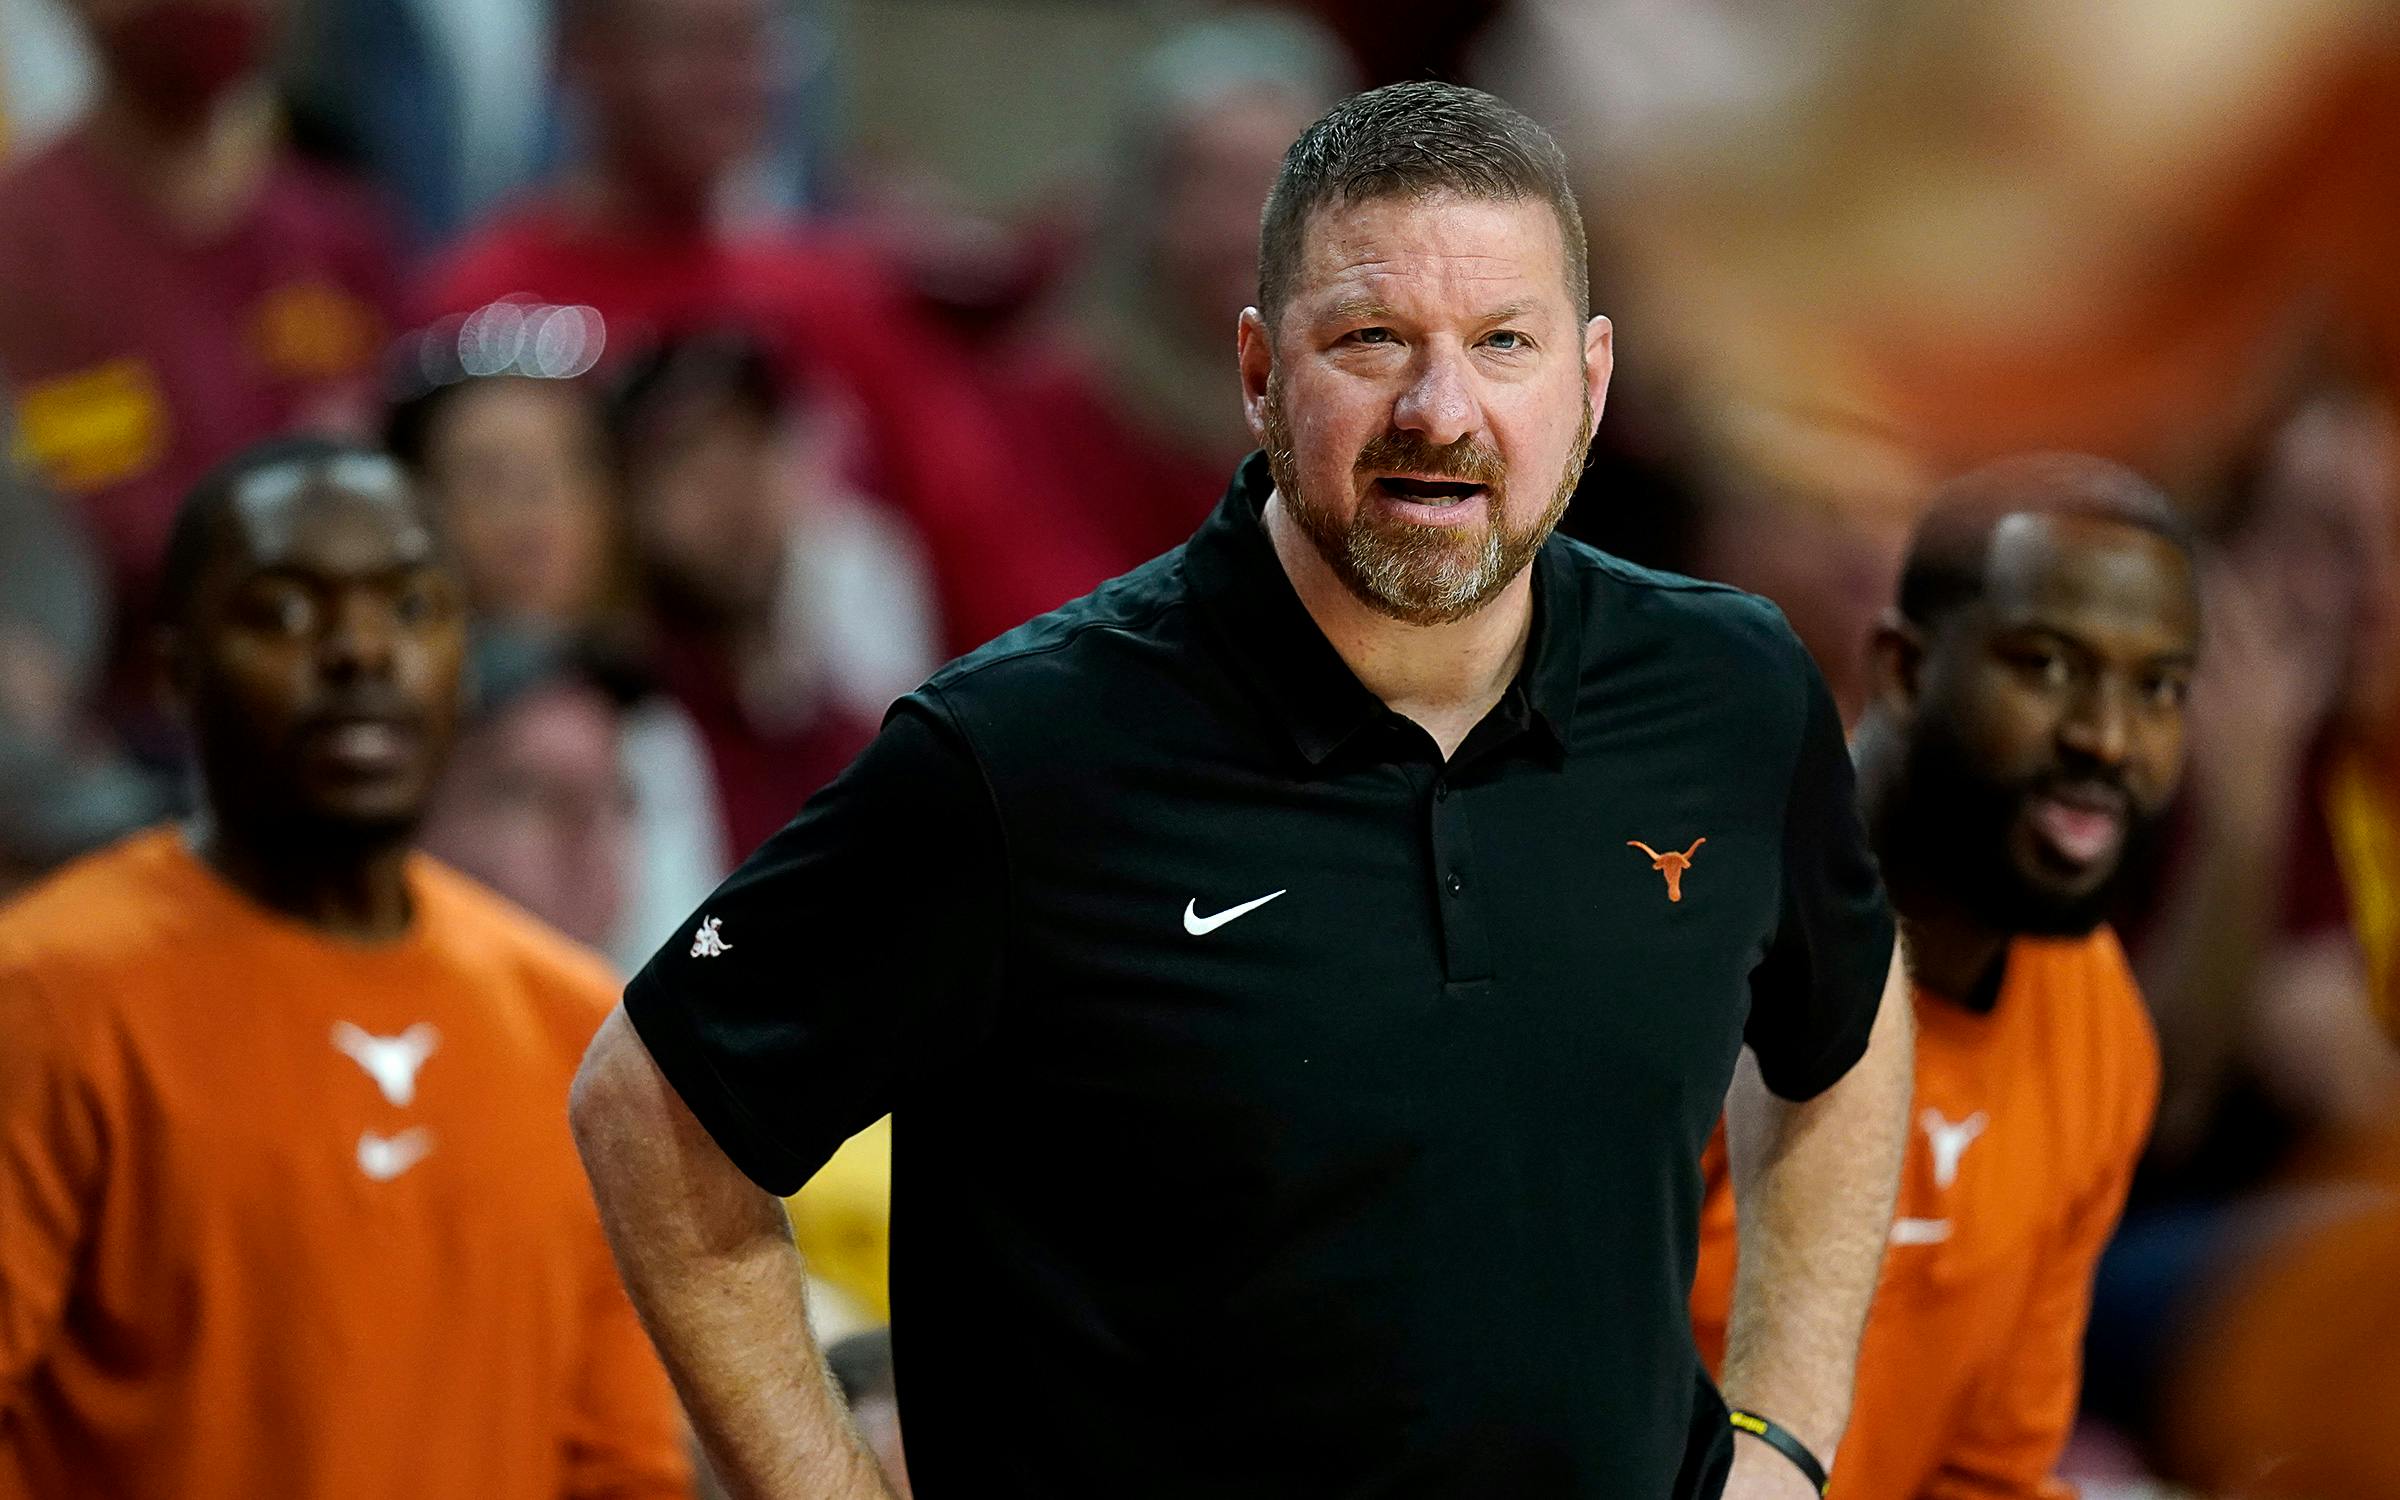 Chris Beard Did the One Thing Texas Tech Fans Cannot Forgive: Leave for UT